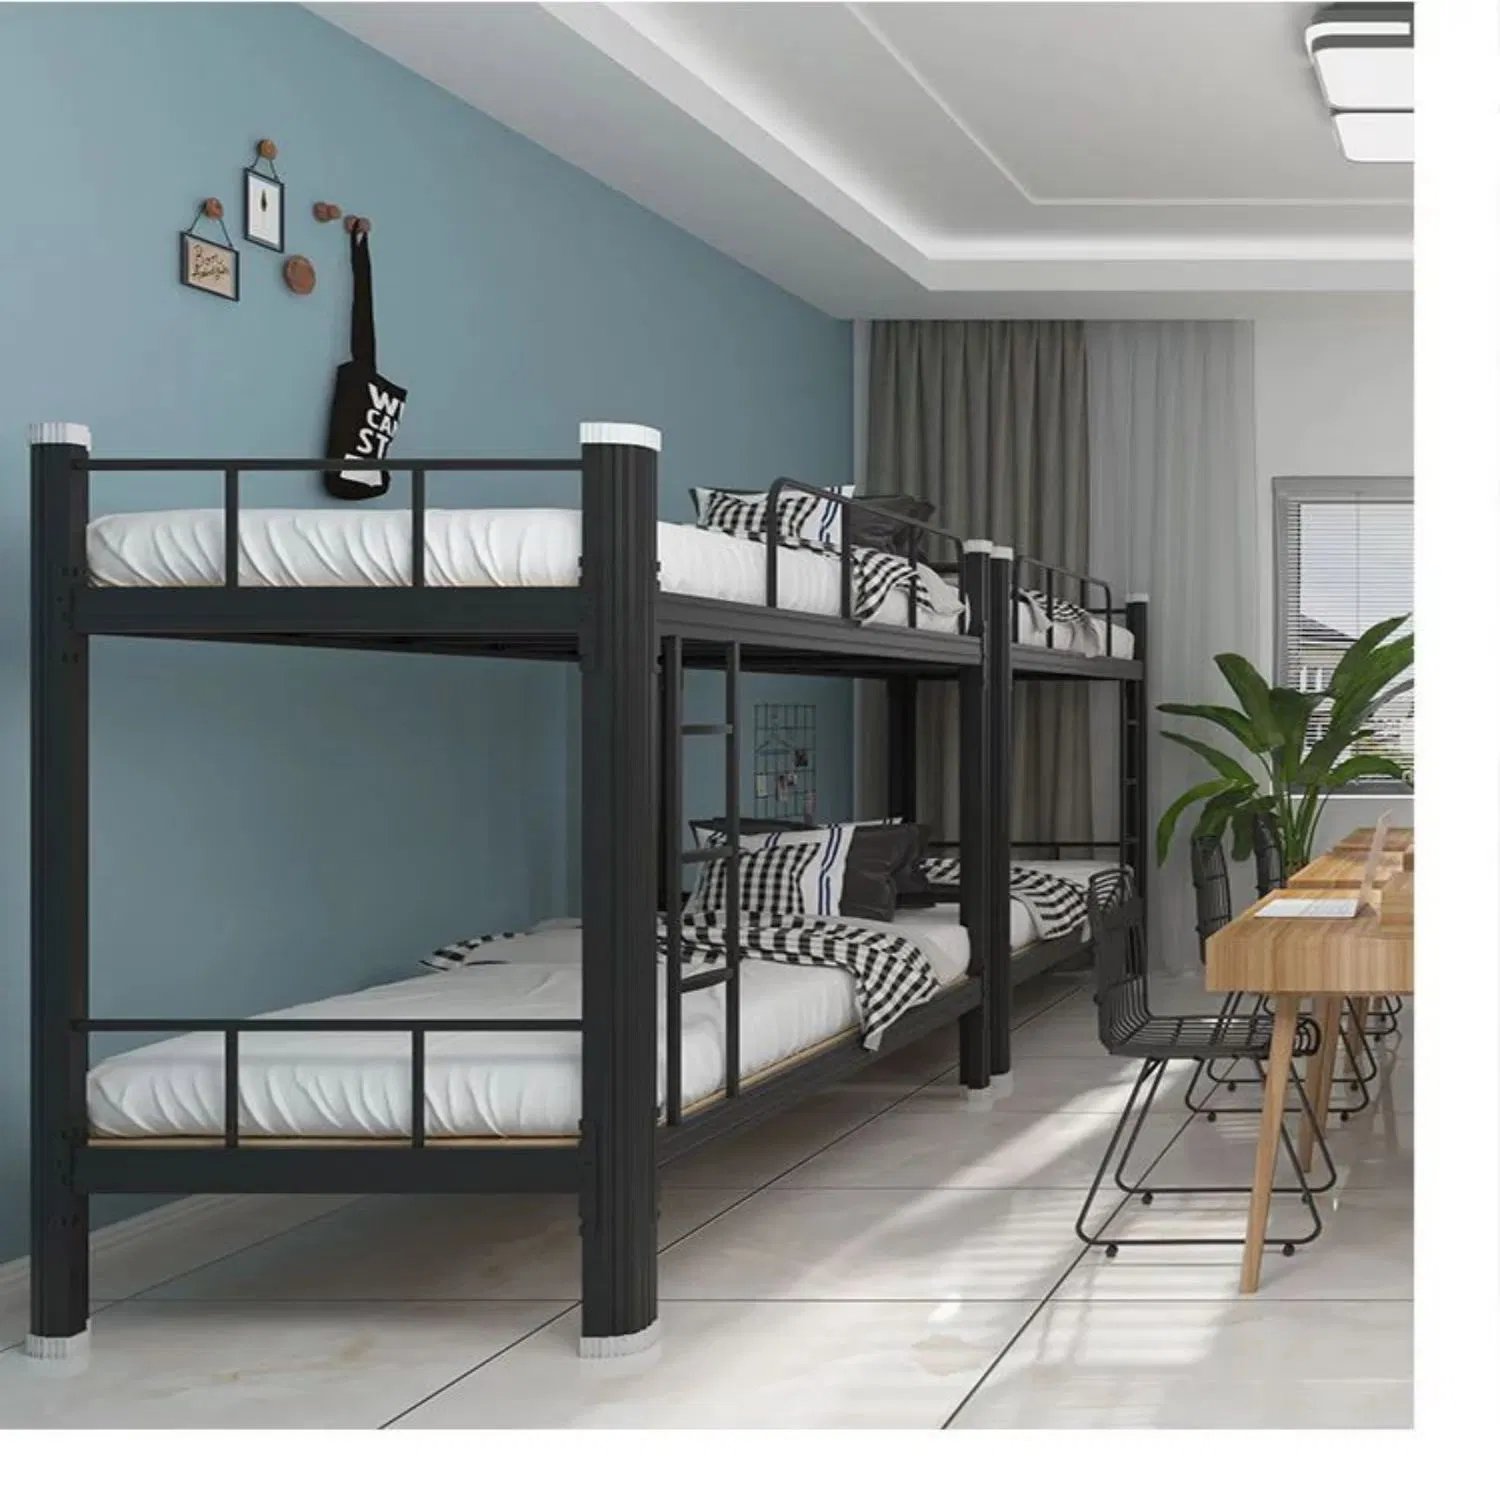 Steel Frame Student Iron Double Dormitory Bed School Metal Furniture